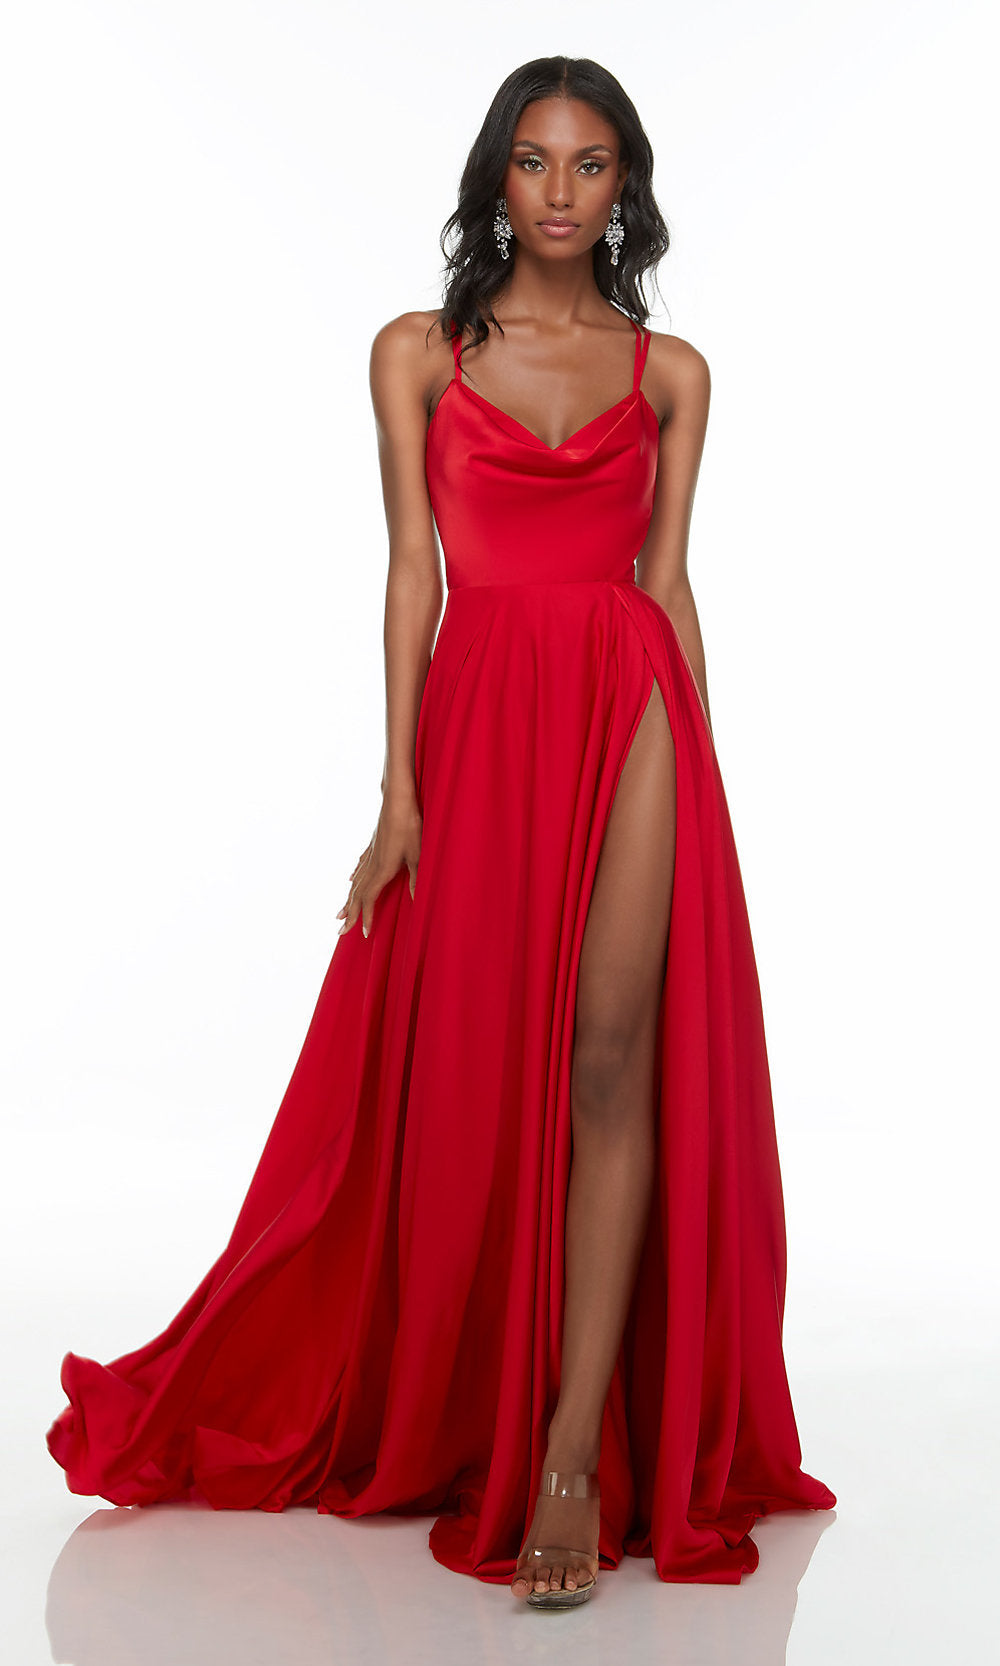  Alyce Long Red Prom Dress with Draped V-Neckline